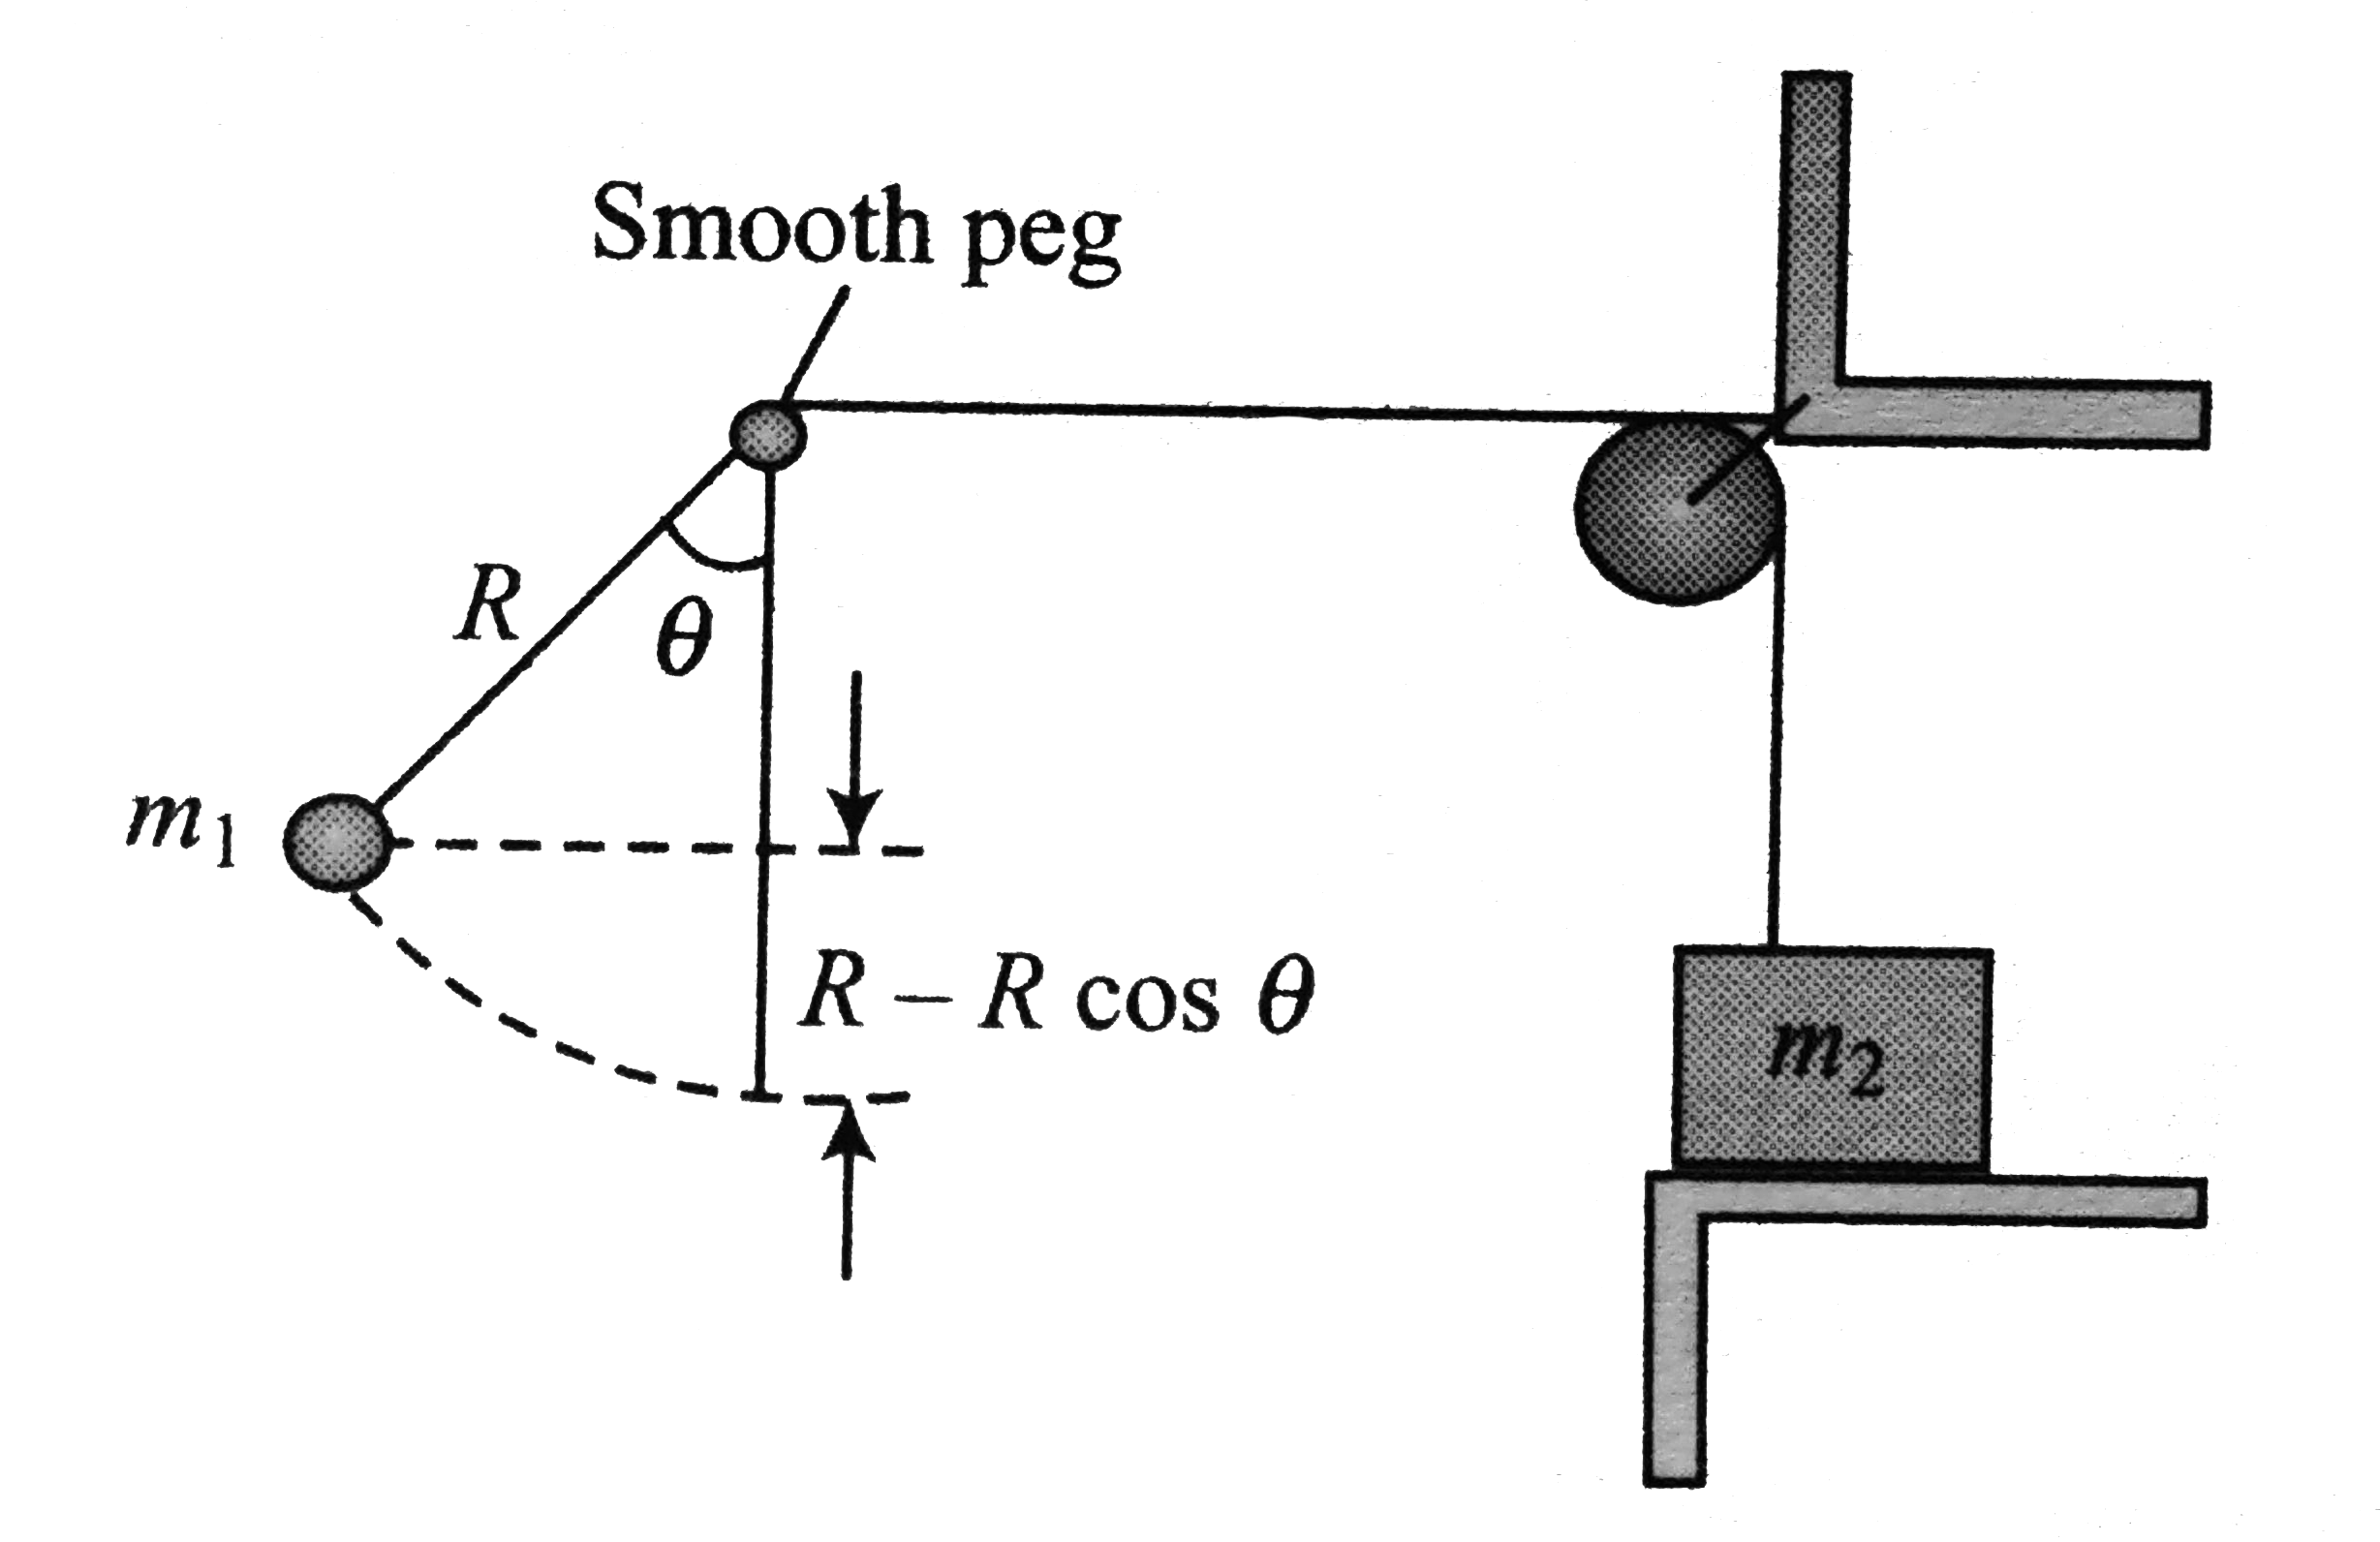 Two blocks are connected by a massless string that passes over a frictionless peg as shown in figure. One end of the string is attached to a mass m1=3kg, i.e., a distance R=1.20m from the peg. The other end of the string is connected to a block of mass m2=6kg resting on a table. From what angle theta, measured from the vertical, must the 3-kg block be released in order to just lift the 6kg block off the table?